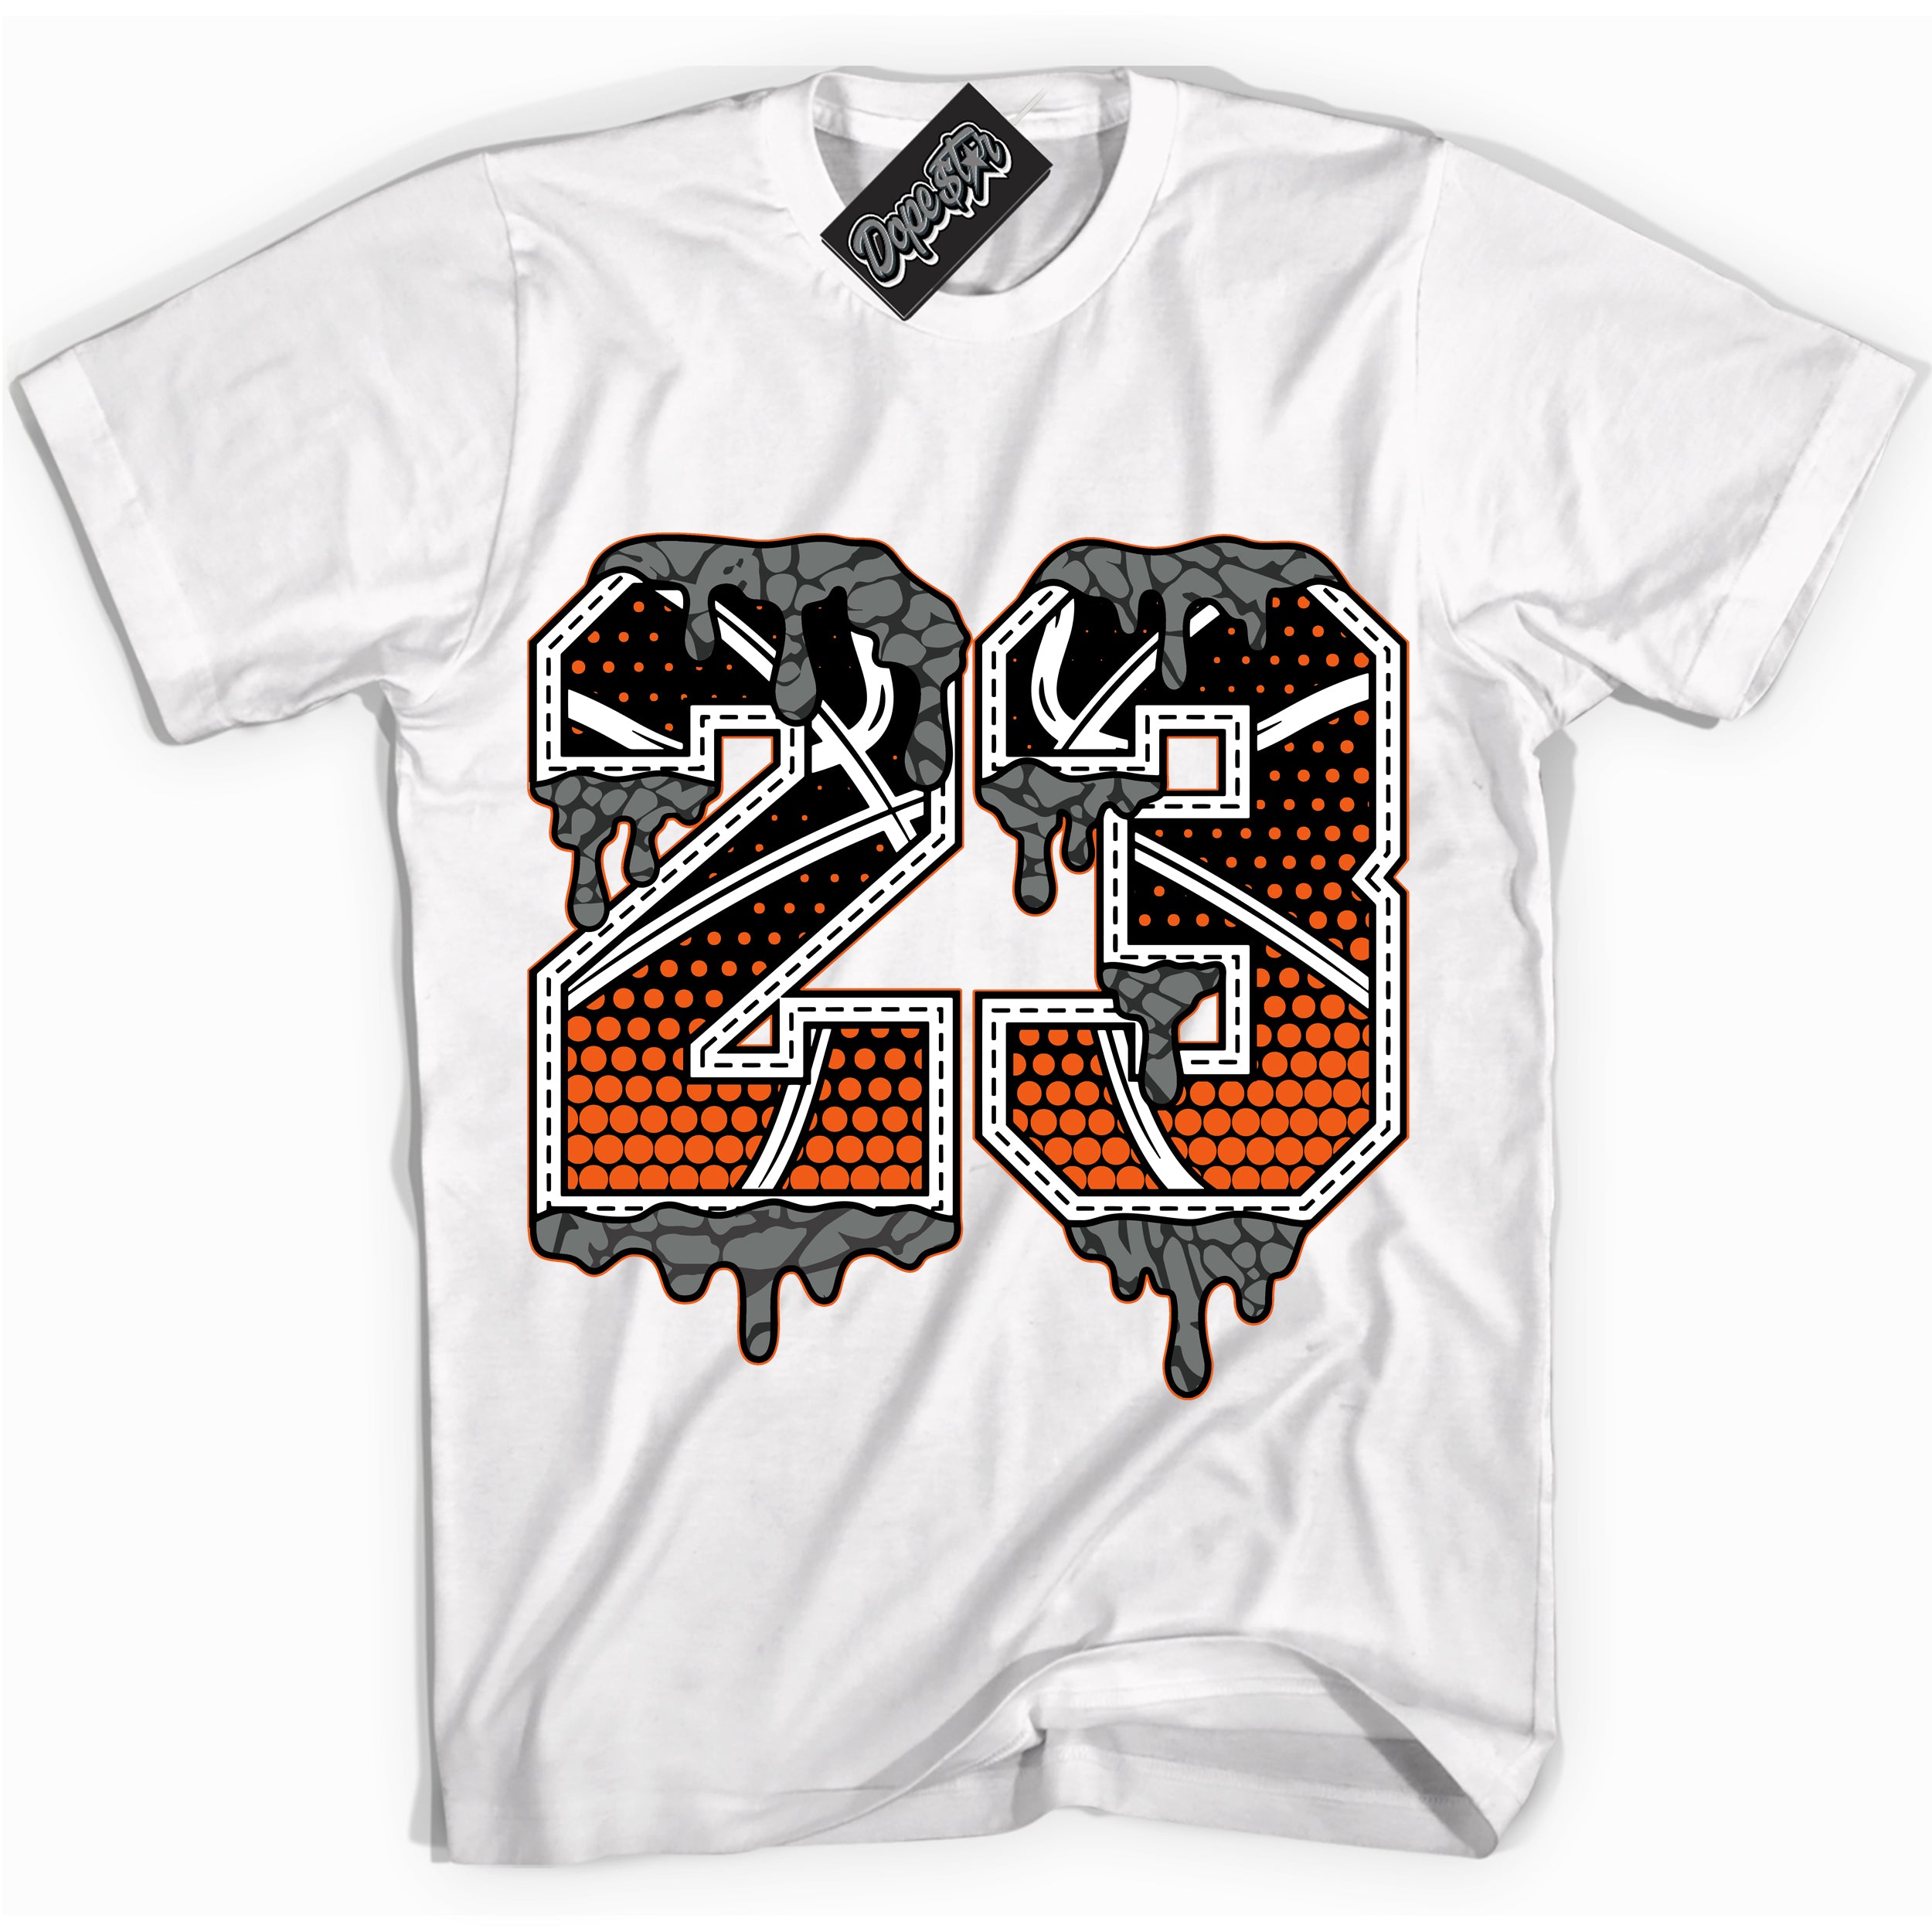 Cool White graphic tee with “ 23 Ball ” design, that perfectly matches Fear Pack 3s sneakers 